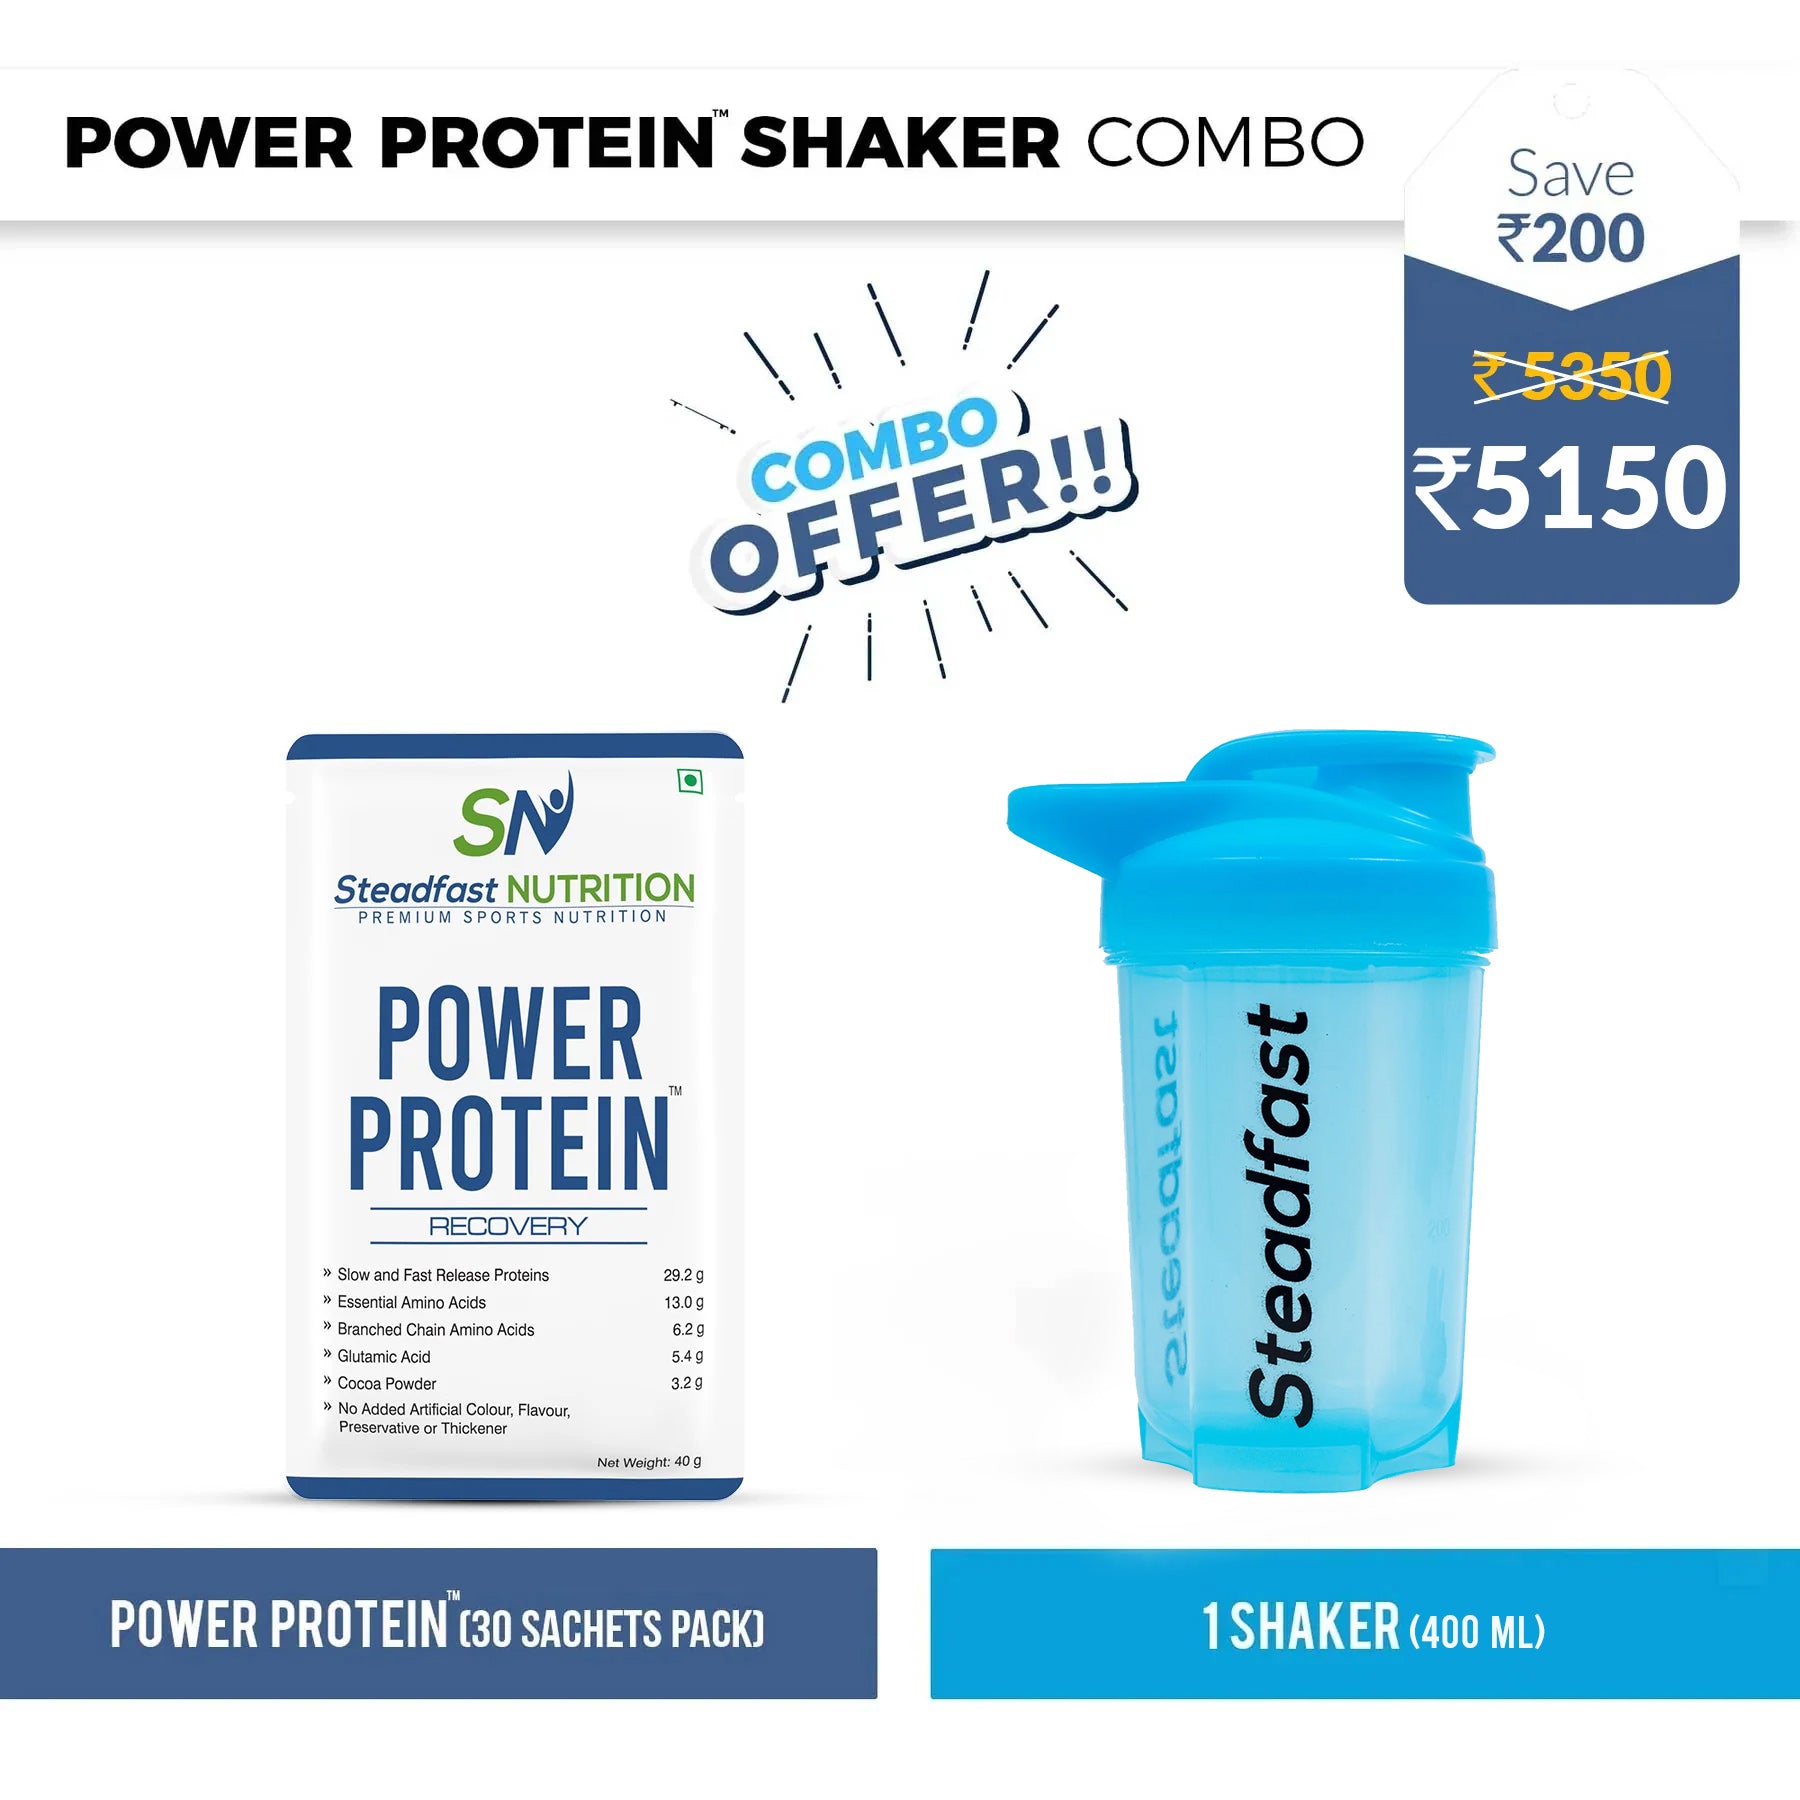 Power Protein Shaker Combo Review